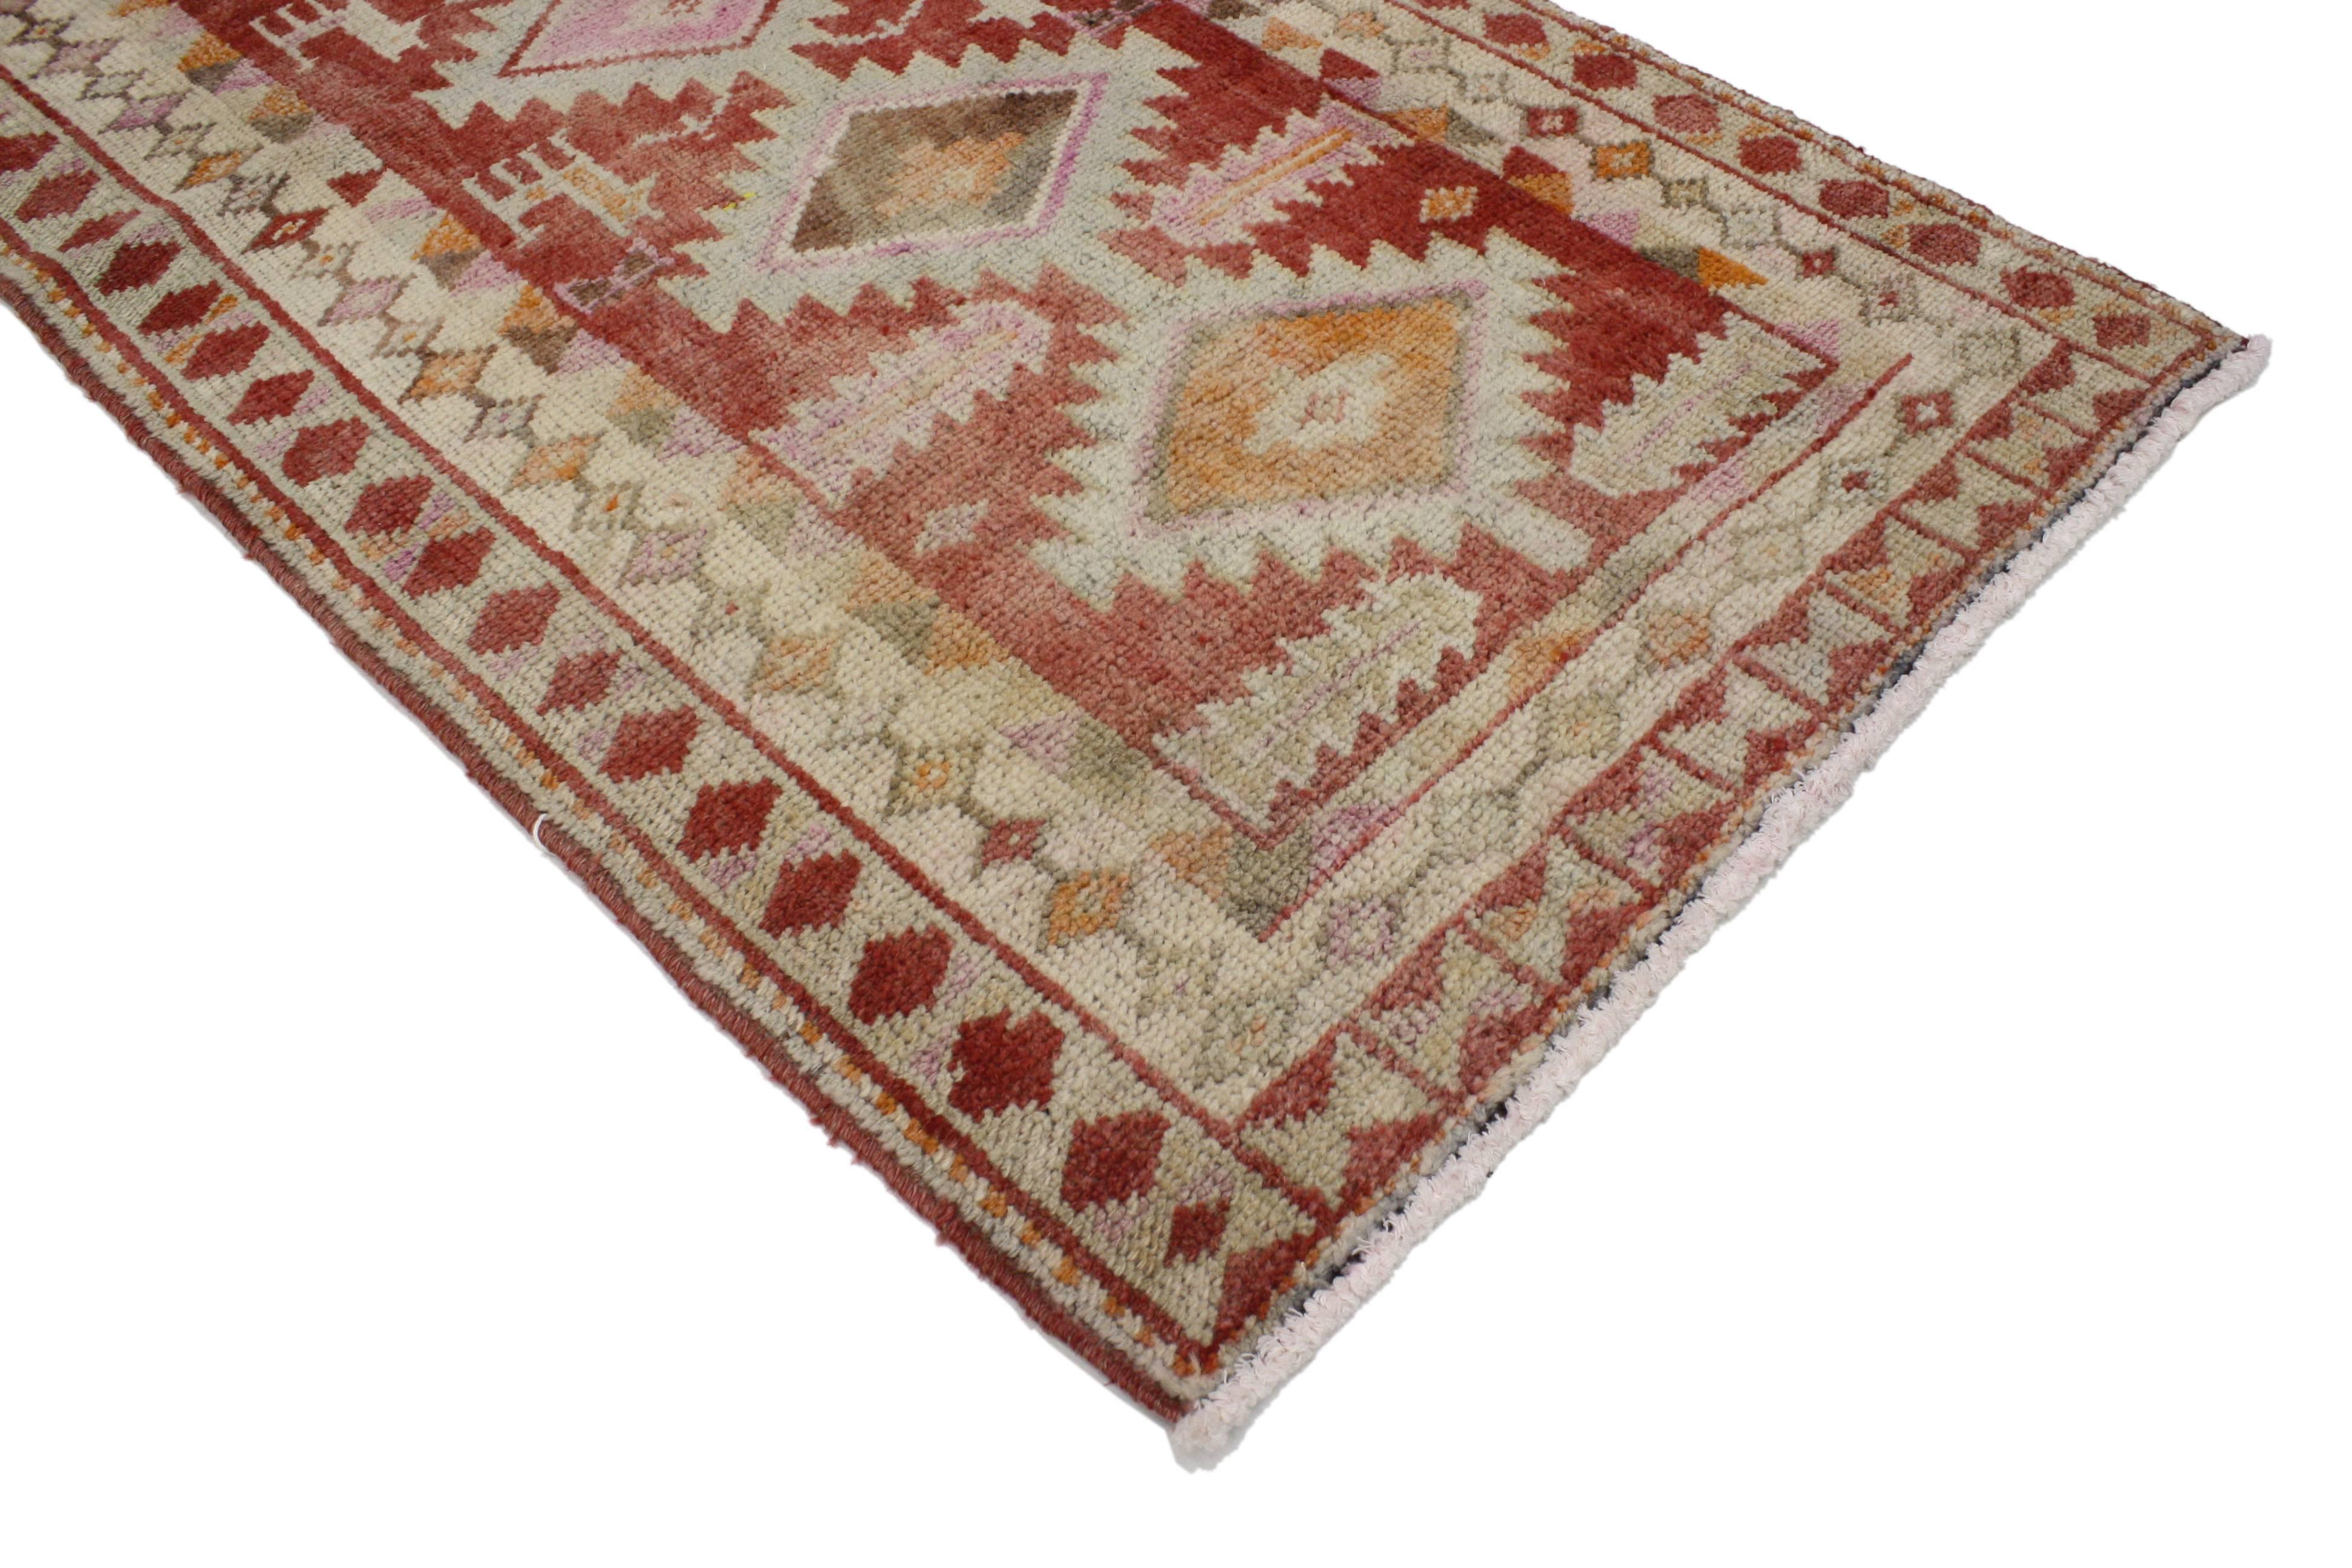 Create a comfortable and tasteful setting with this vintage Turkish Oushak carpet runner. With its narrow size, this vintage Oushak runner is perfect for stairs, skinny hallways, narrow foyers, entryways and galley kitchens. Featuring a refined